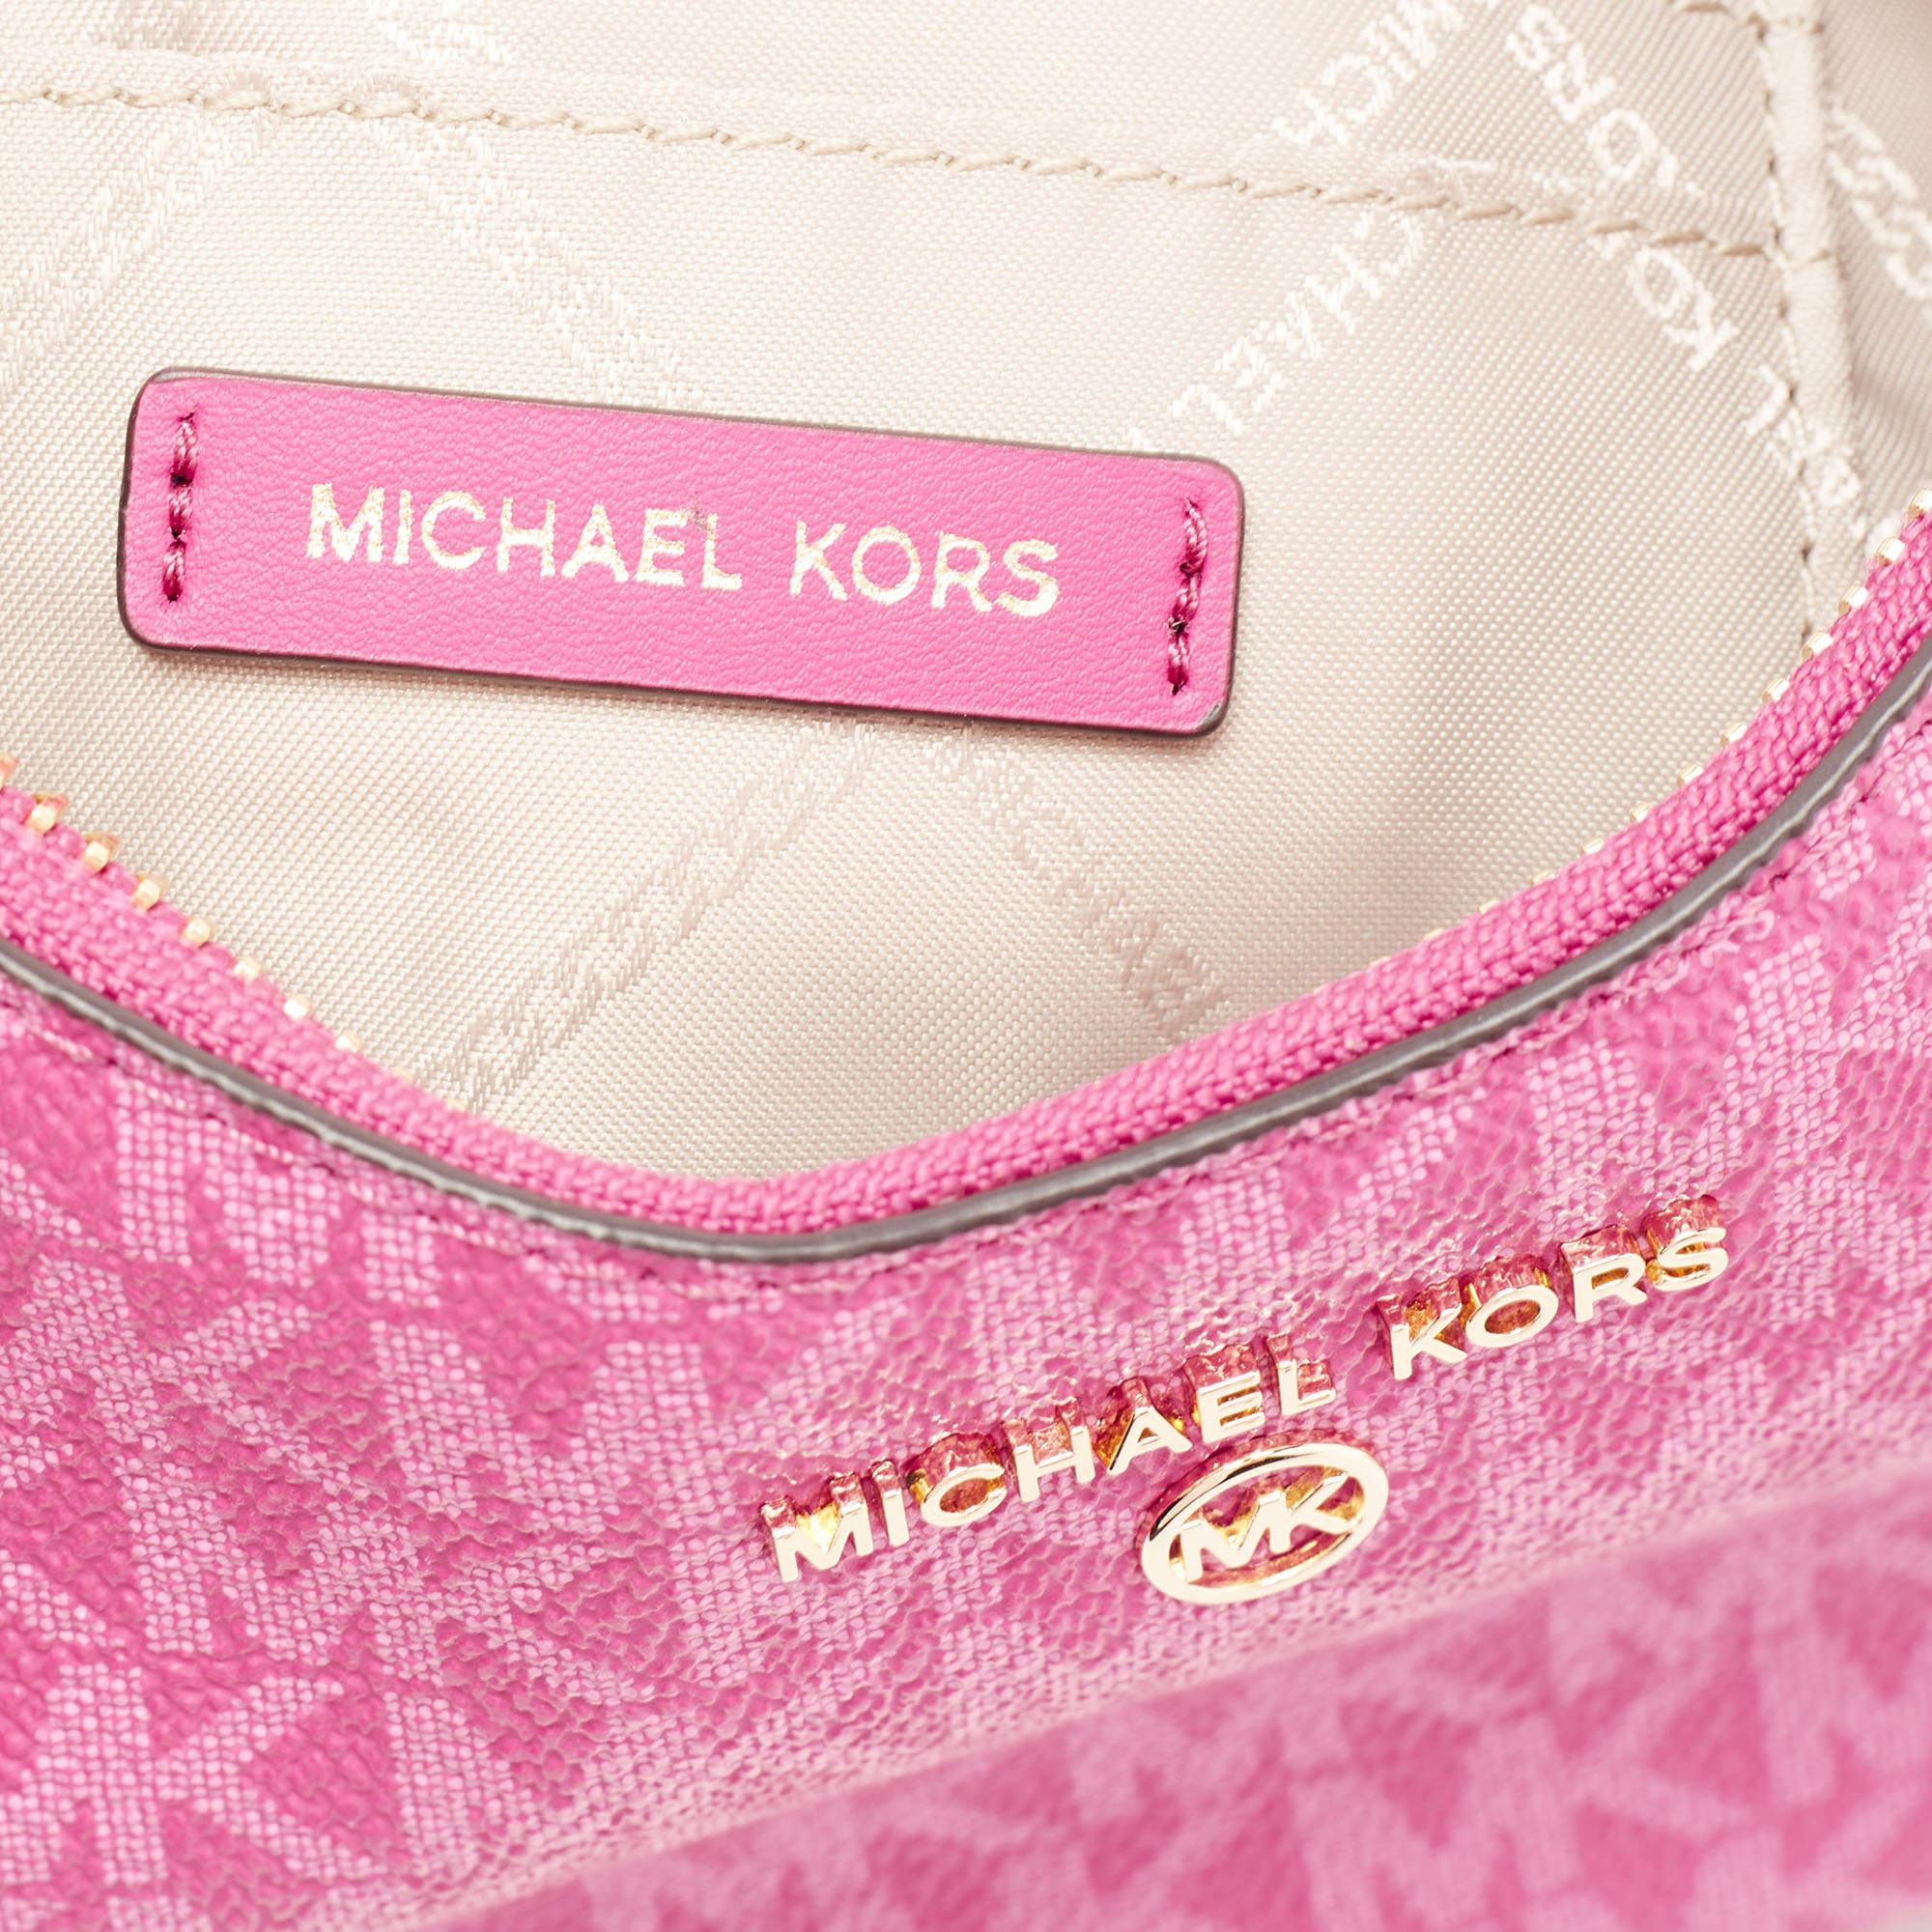 Michael Kors Pink Signature Coated Canvas and Leather Charm Pochette Bag  Michael Kors